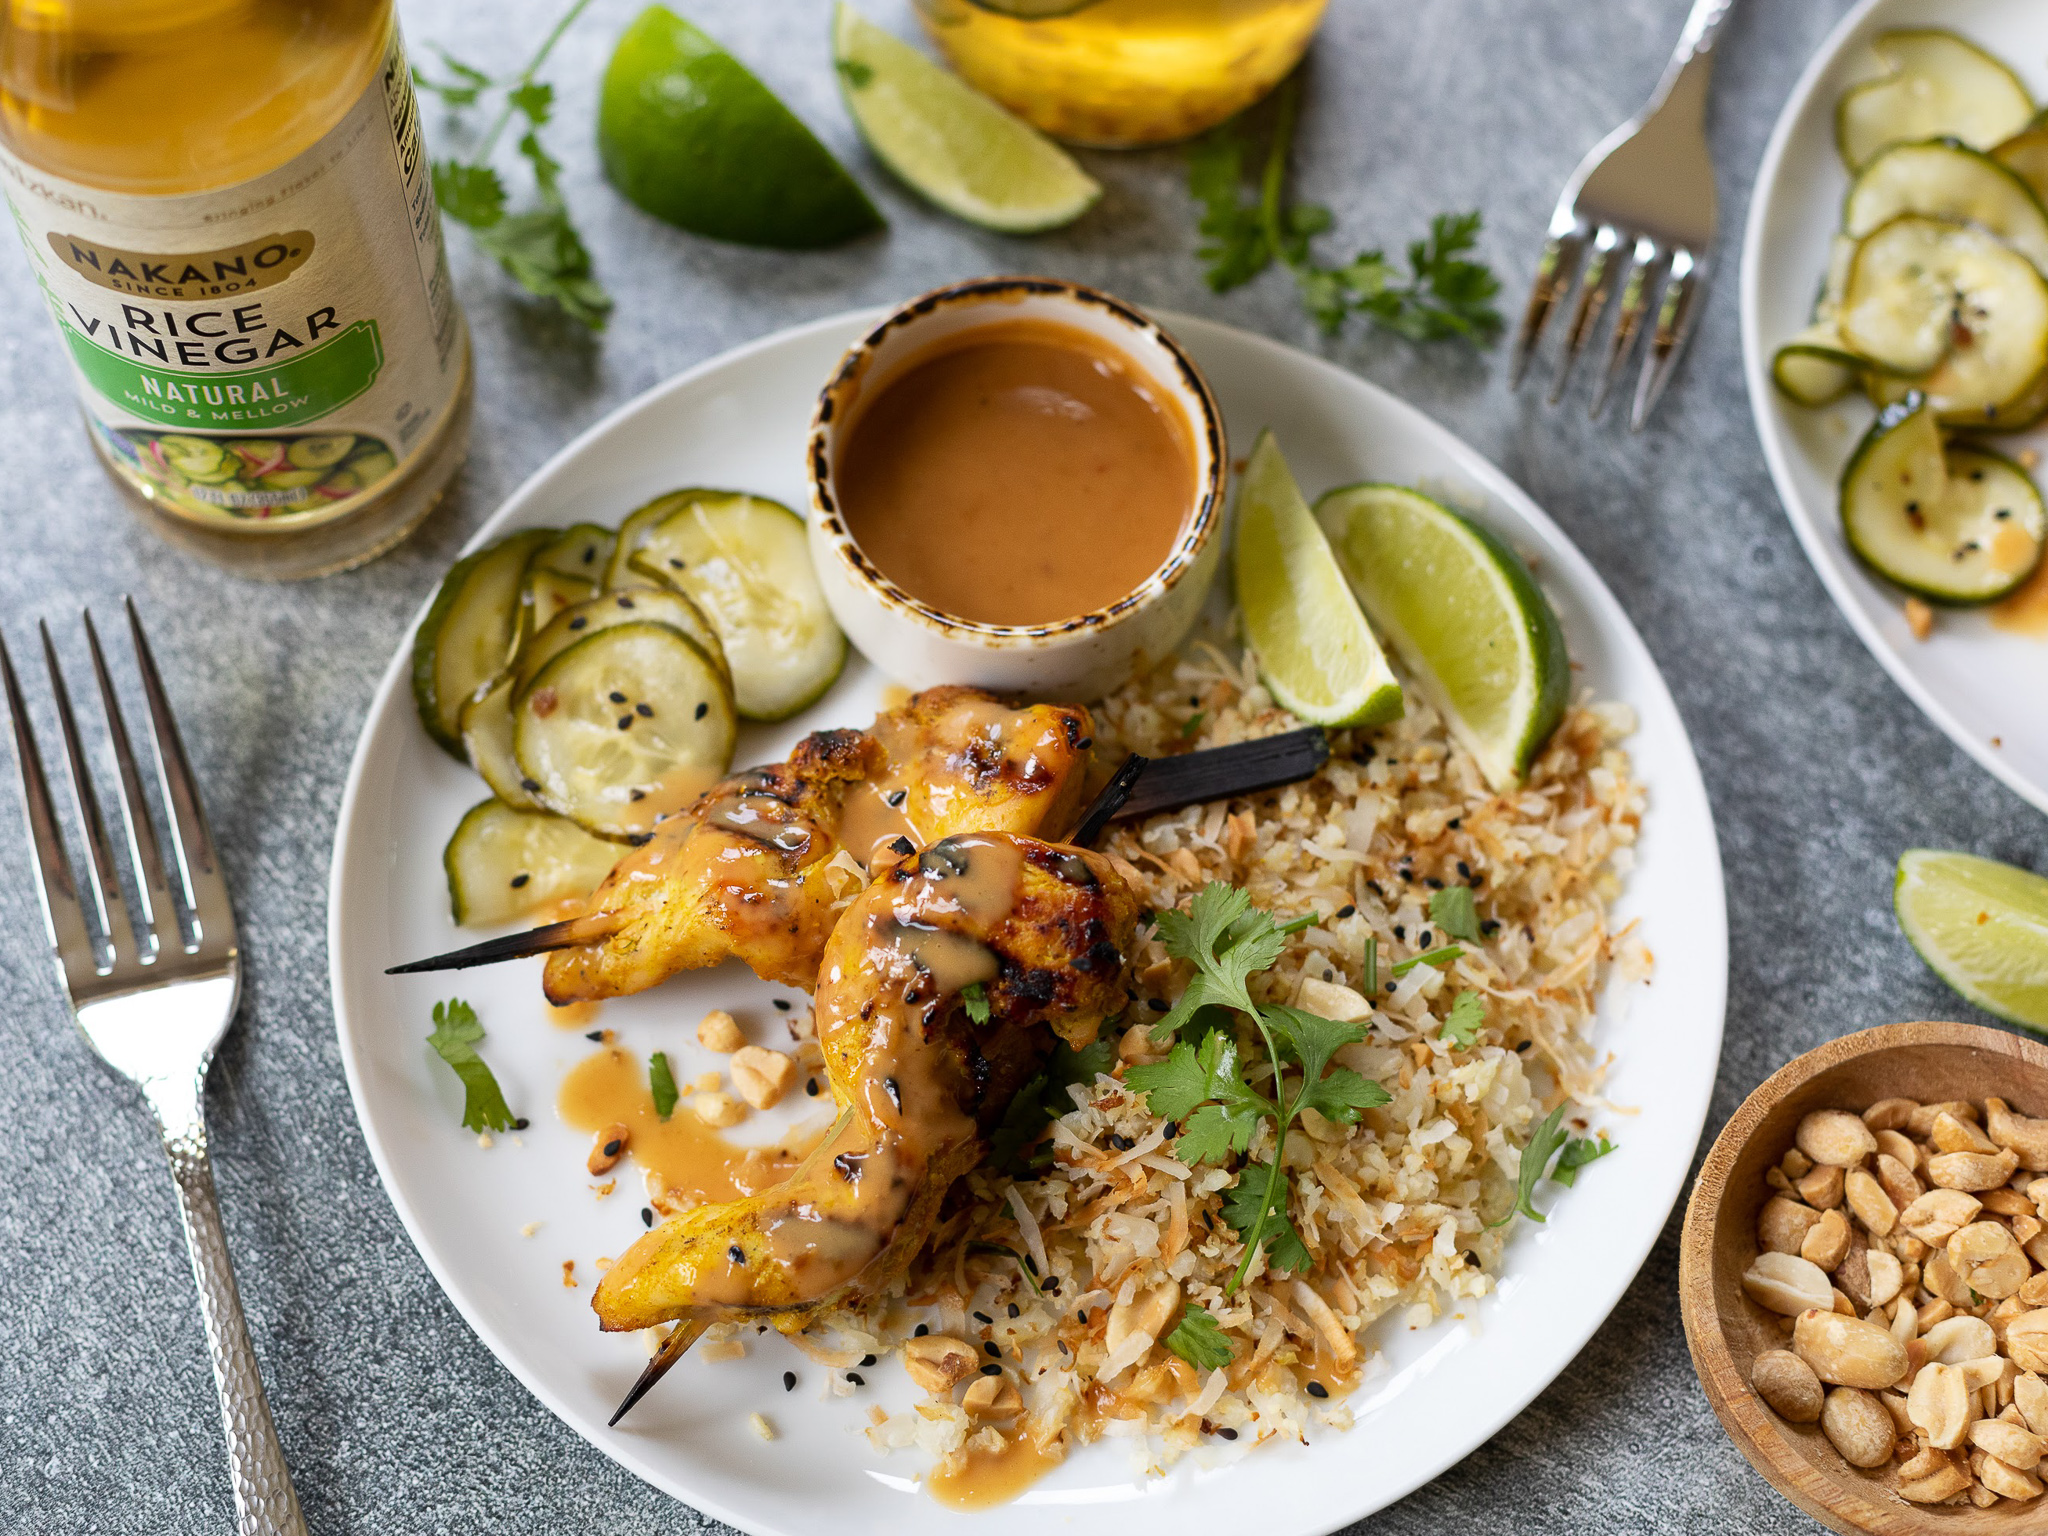 Get Nakano® Rice Vinegar At Publix And Whip Up My Tasty Chicken Satay With Coconut Cauliflower Rice